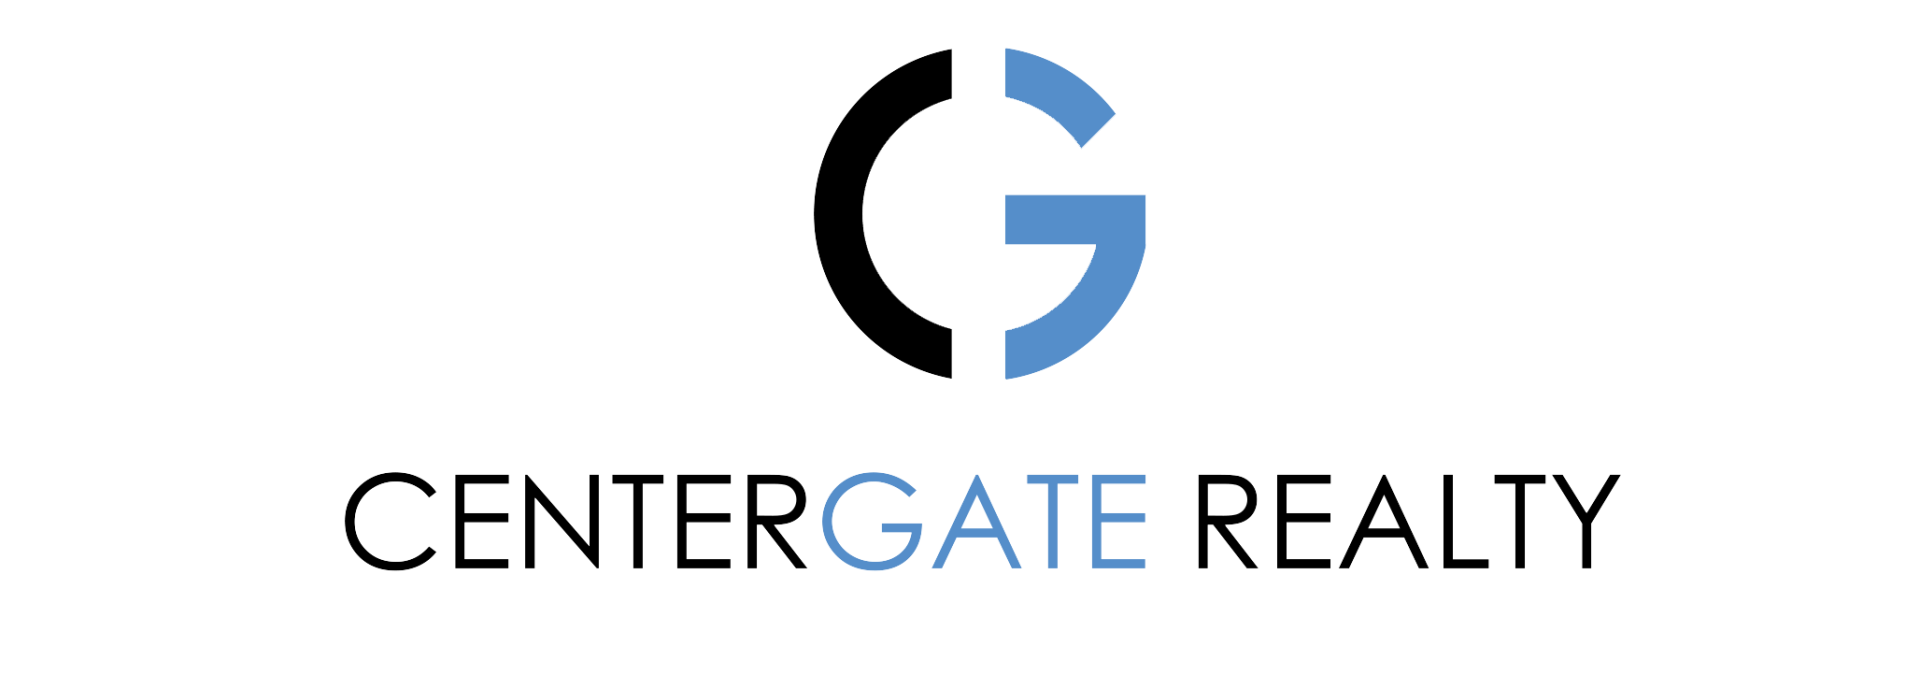 CenterGate Realty